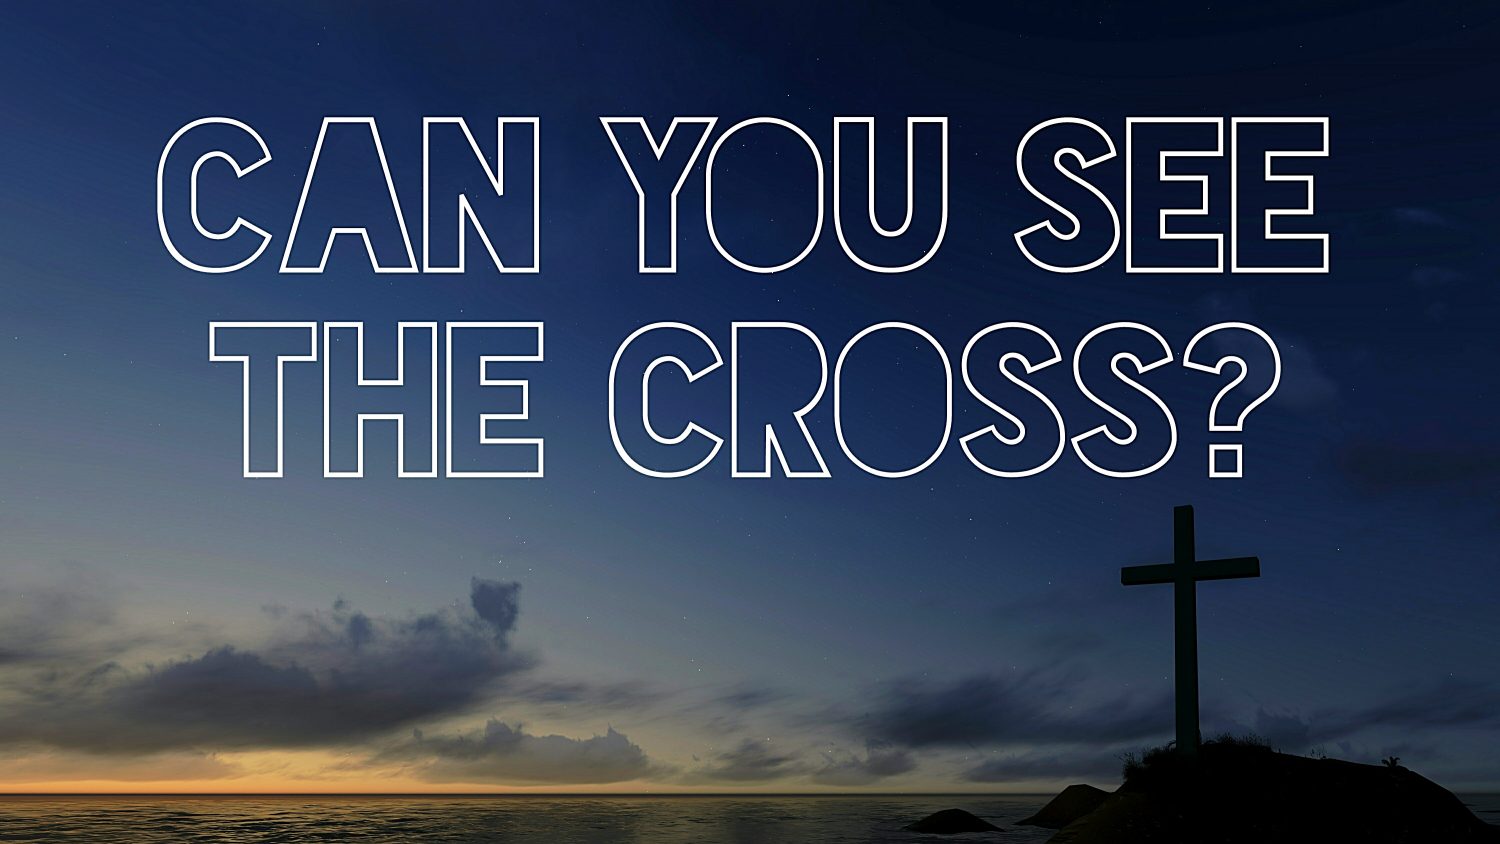 Can You See The Cross?